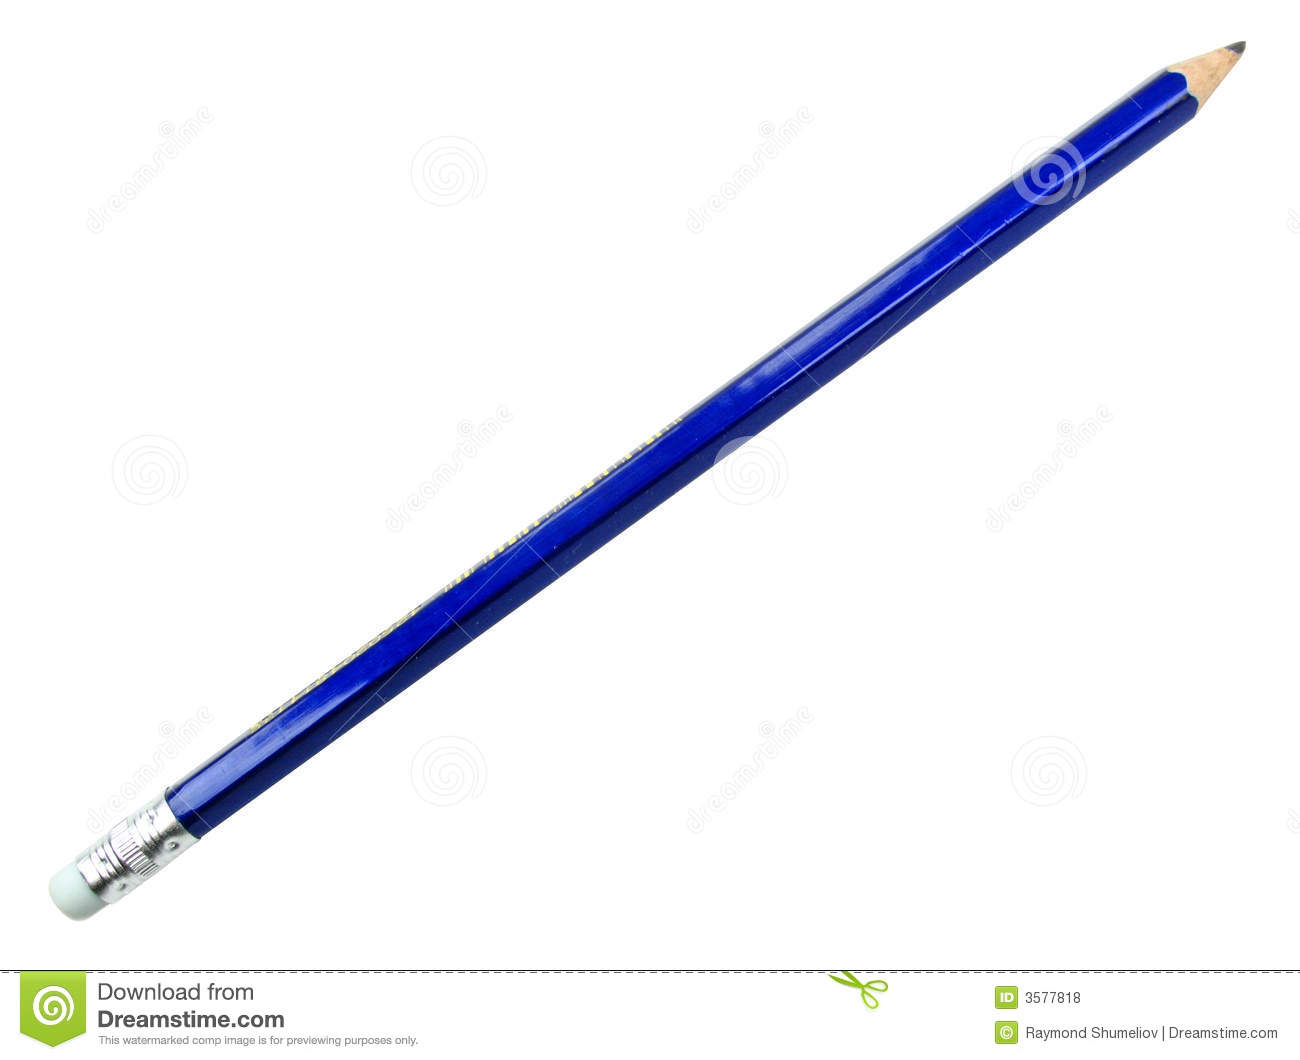 Blue Pencil With Eraser Royalty Free Stock Photos   Image  3577818